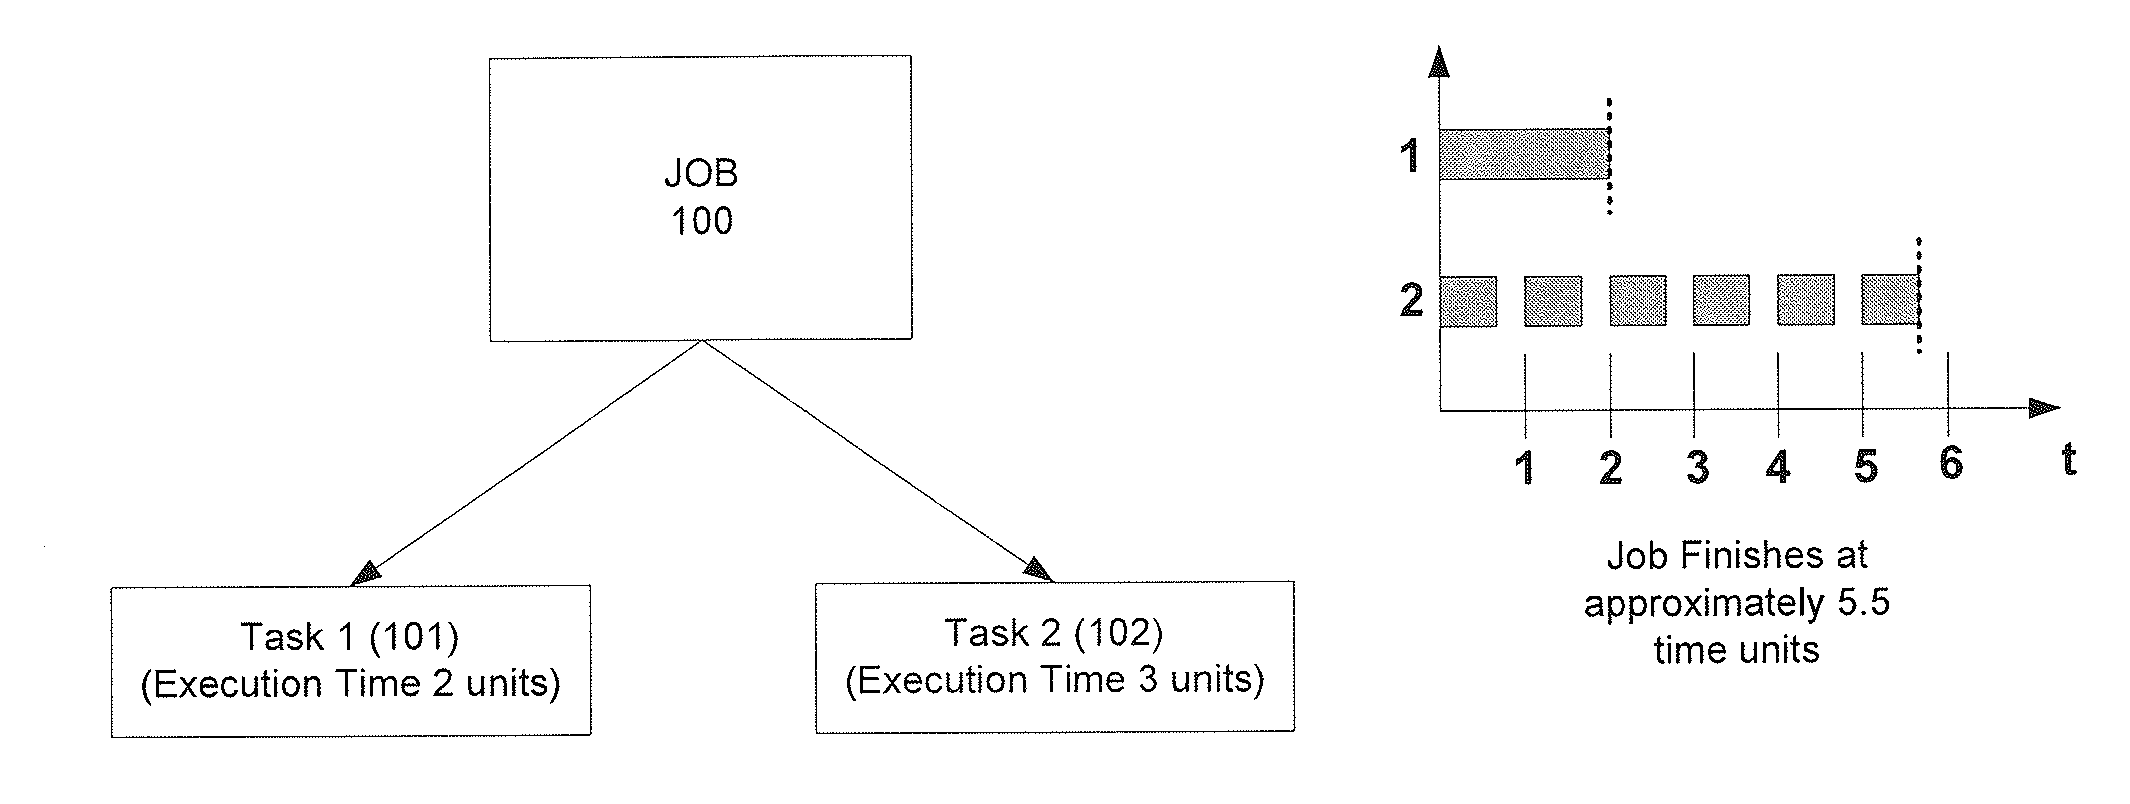 Scheduling of tasks based upon historical execution times